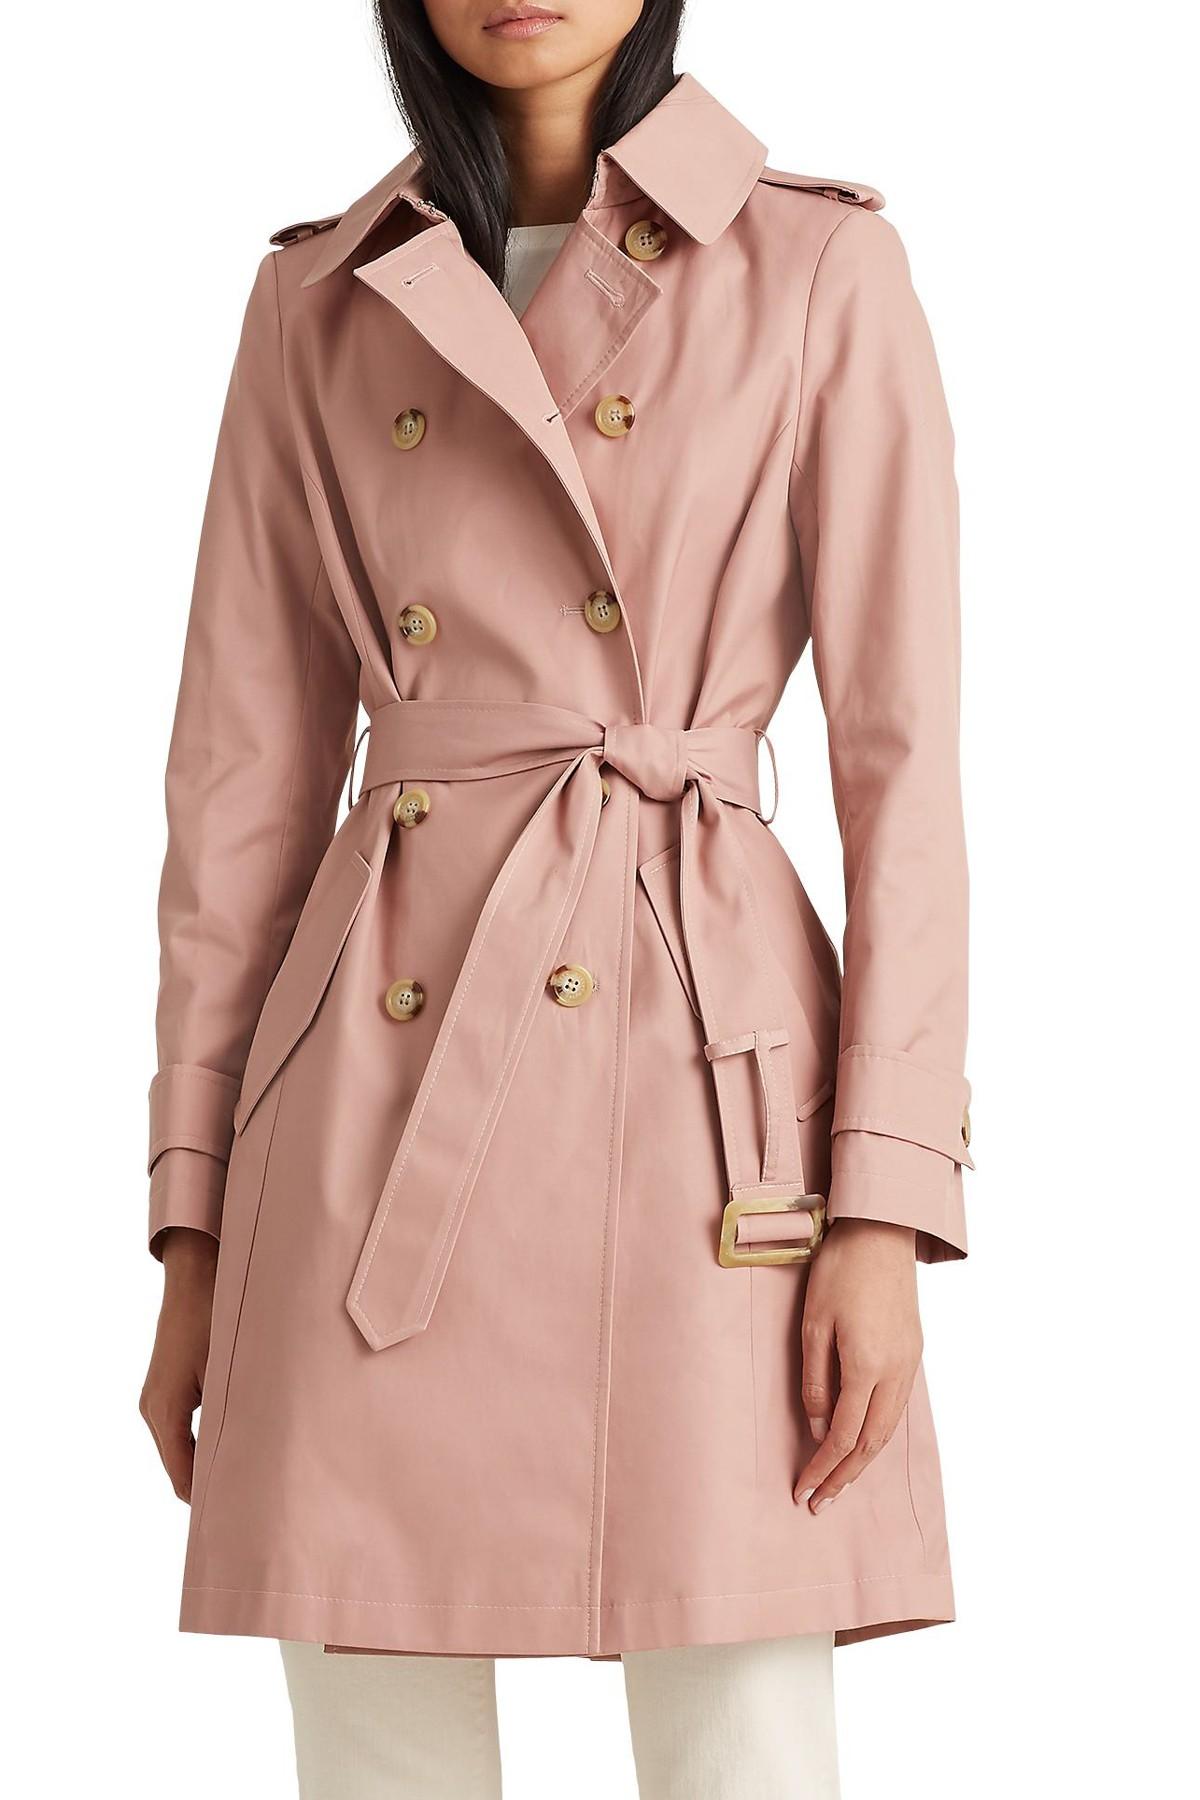 Lauren by Ralph Lauren Double Breasted Belted Trench Coat in Blush (Pink) |  Lyst